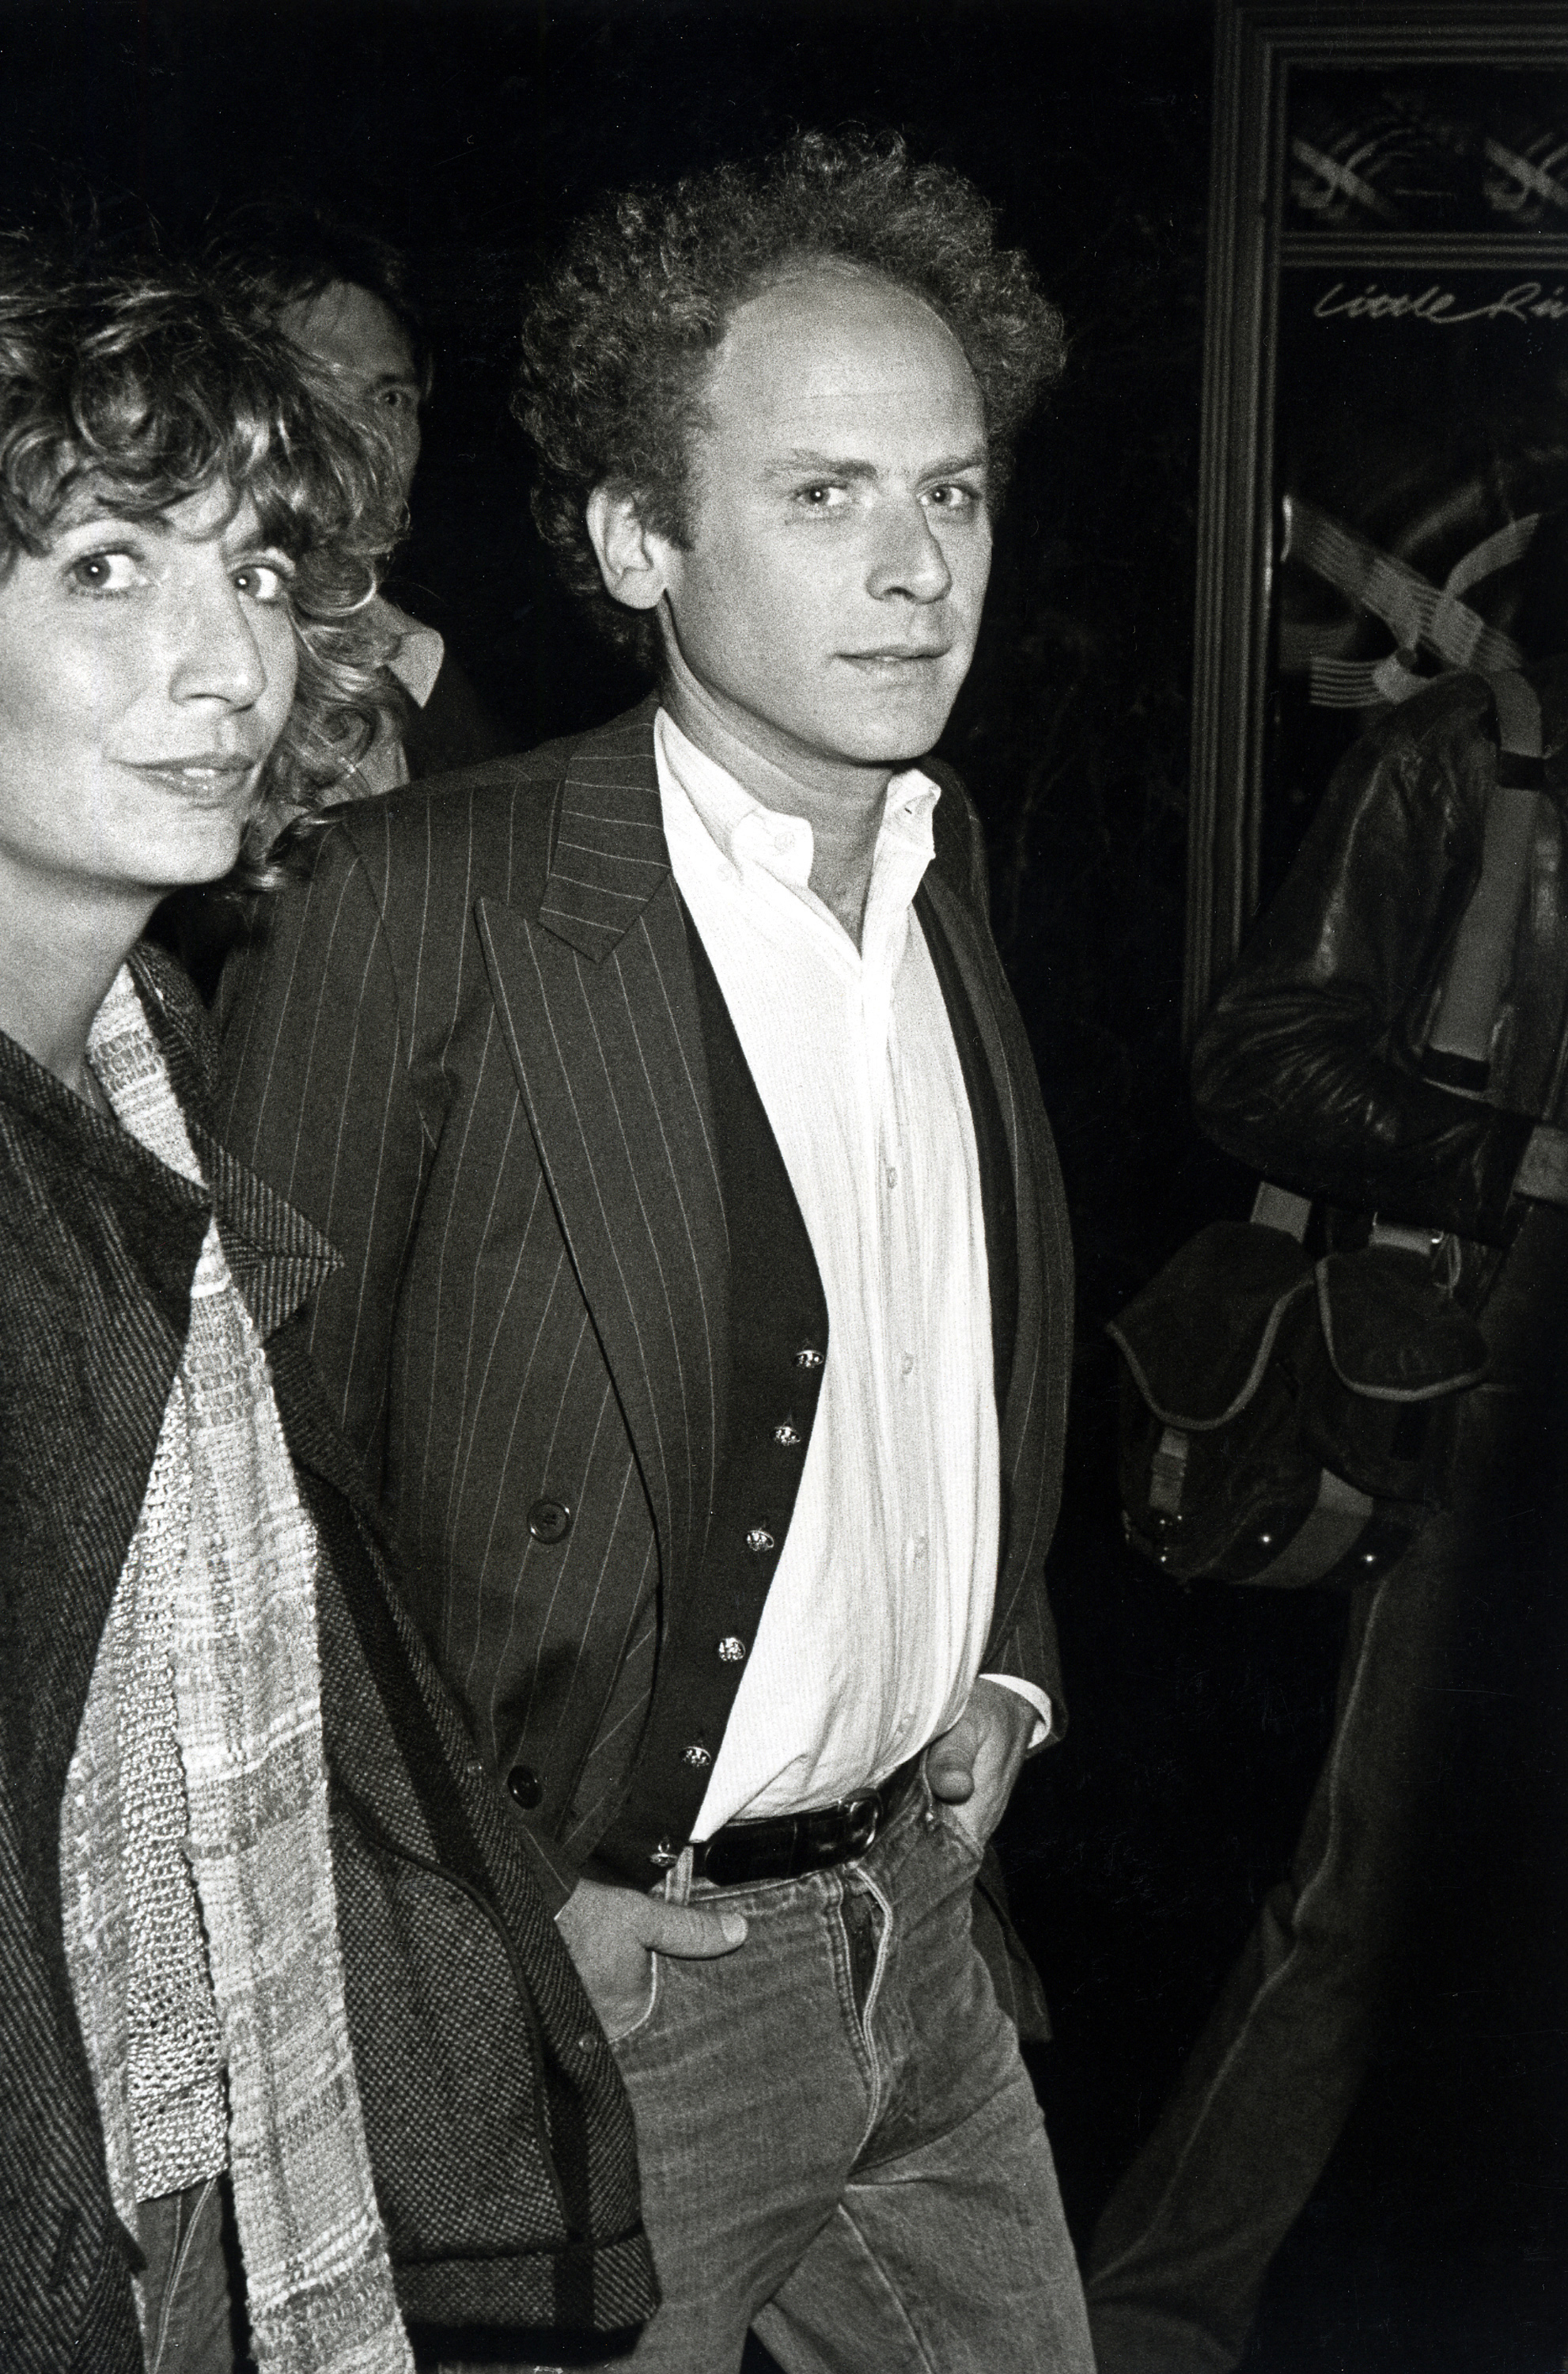 A black and white photograph of actor Penny Marshall with musical artist Art Garfunkel